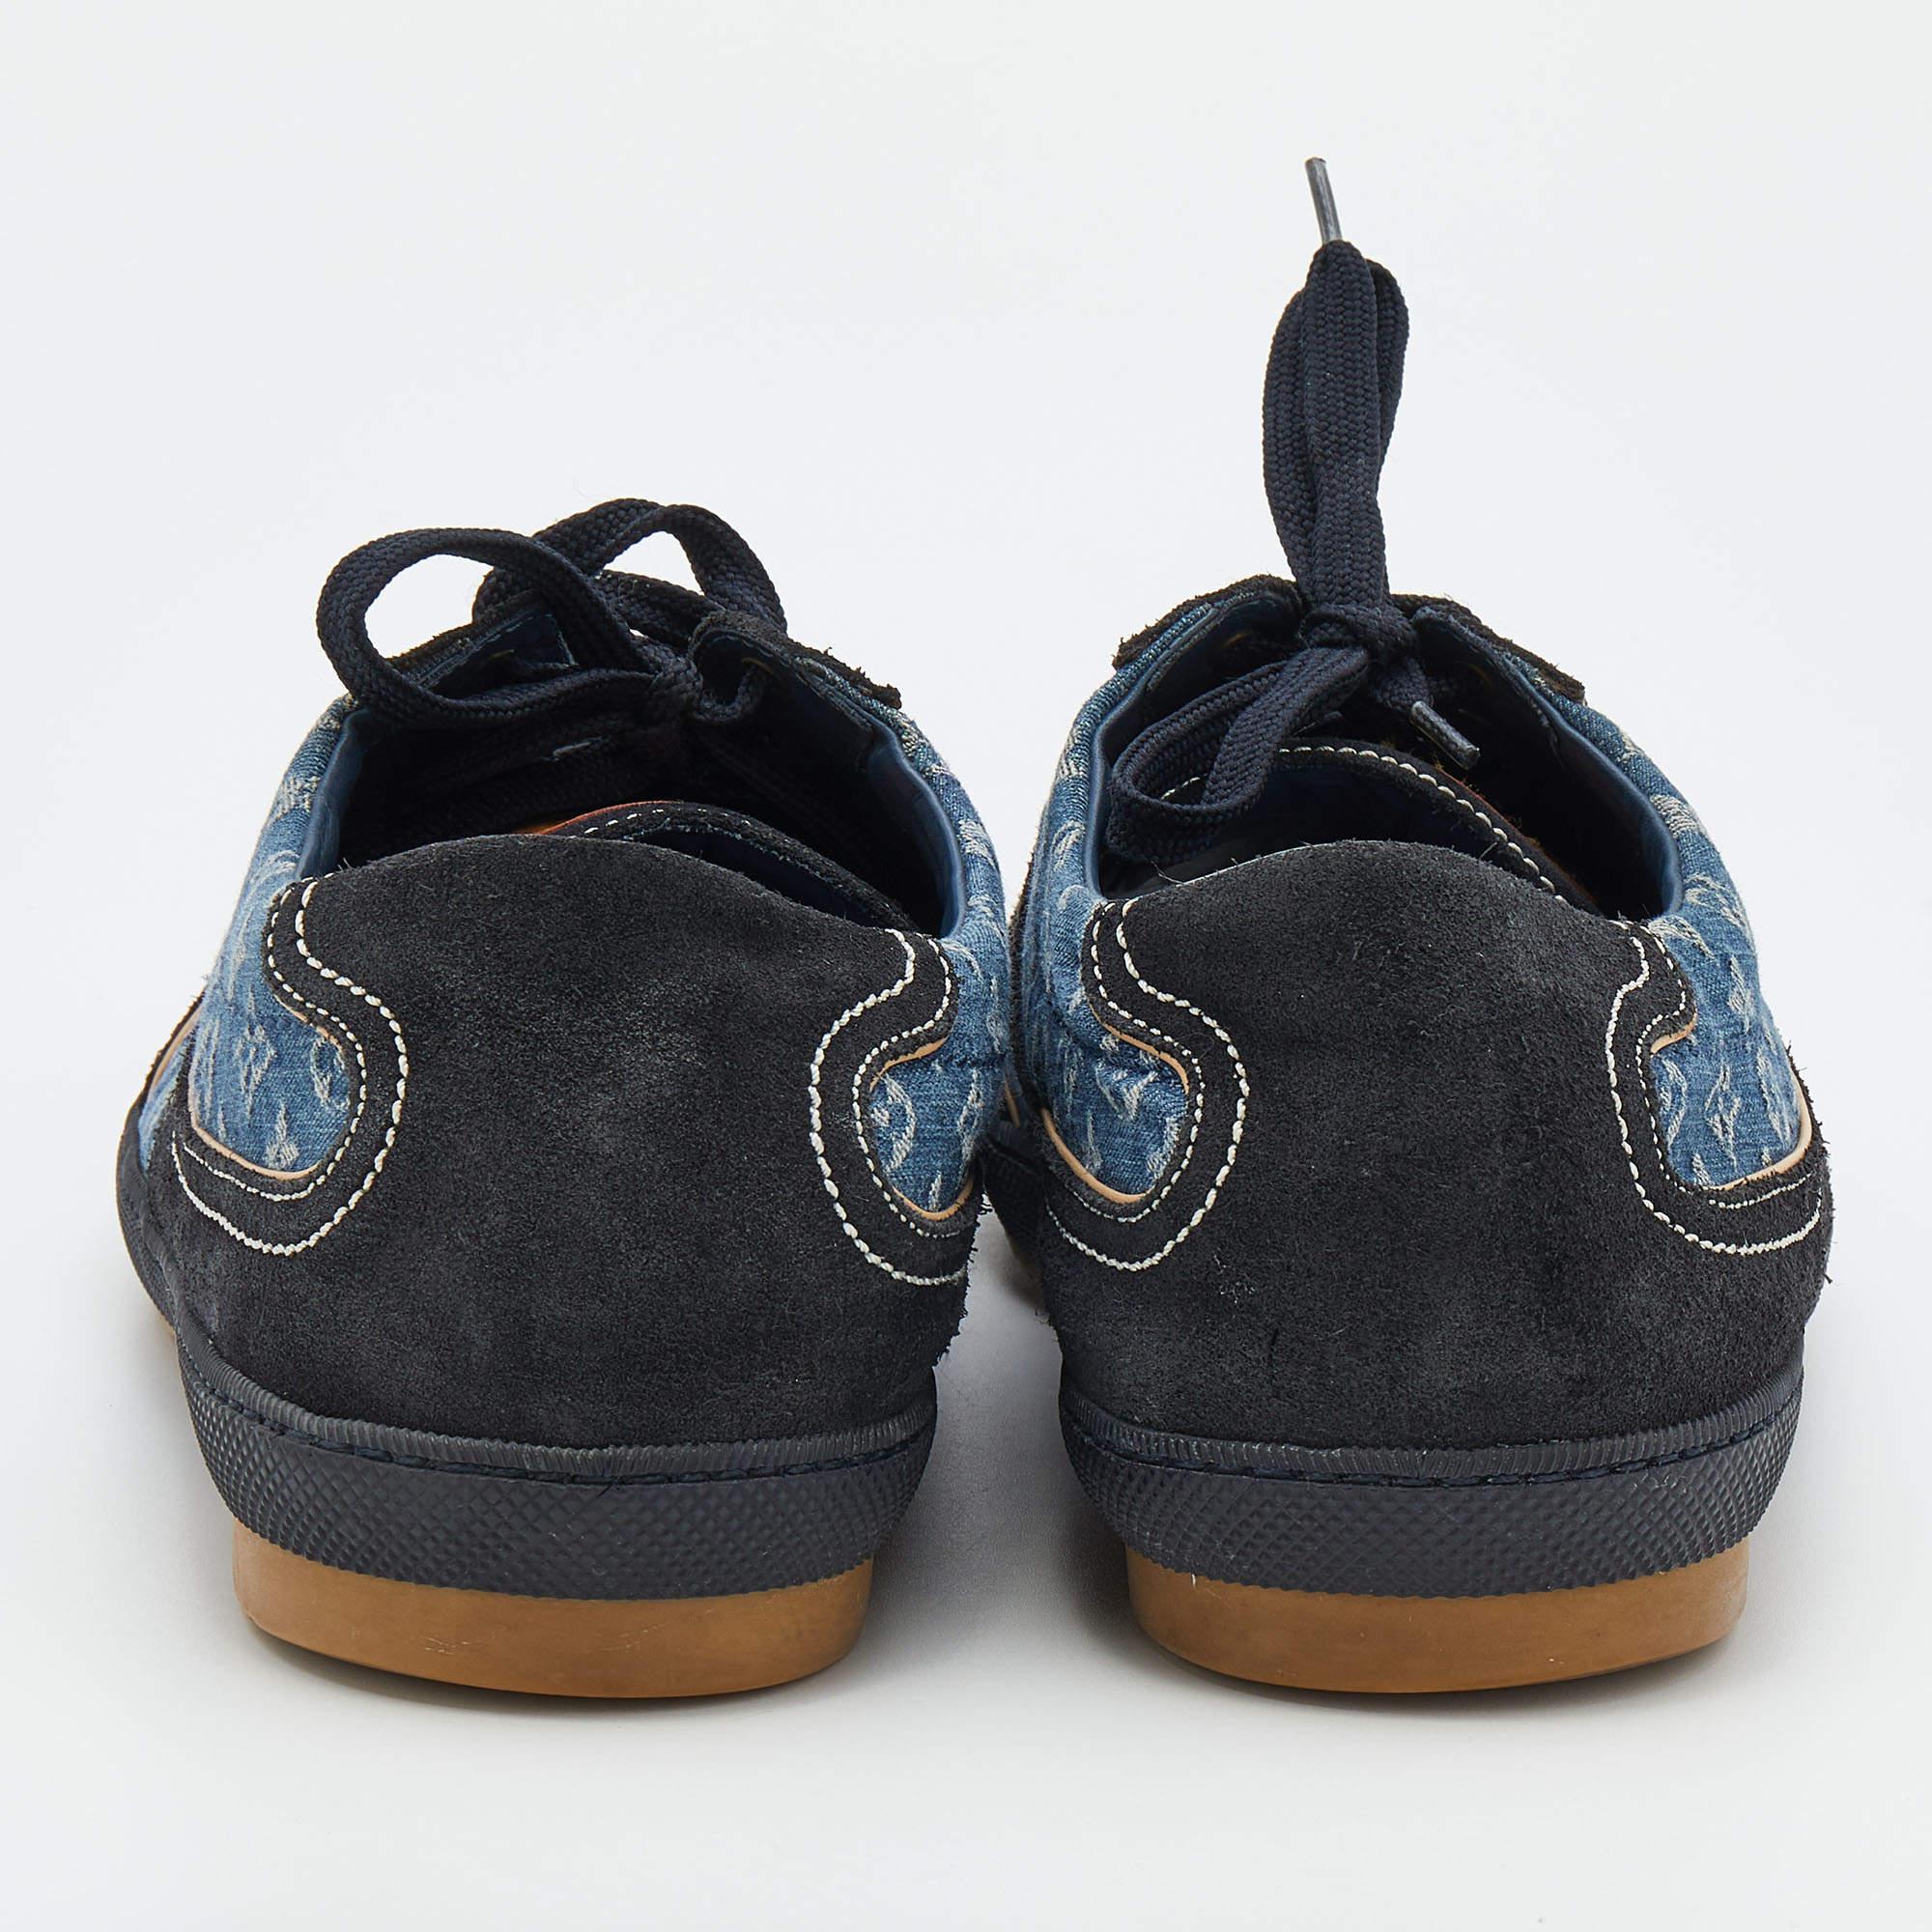 Add the classy Louis Vuitton touch to your outfit with these low-top sneakers. Crafted from Monogram denim and suede, they have lace-up closure and durable rubber soles.

